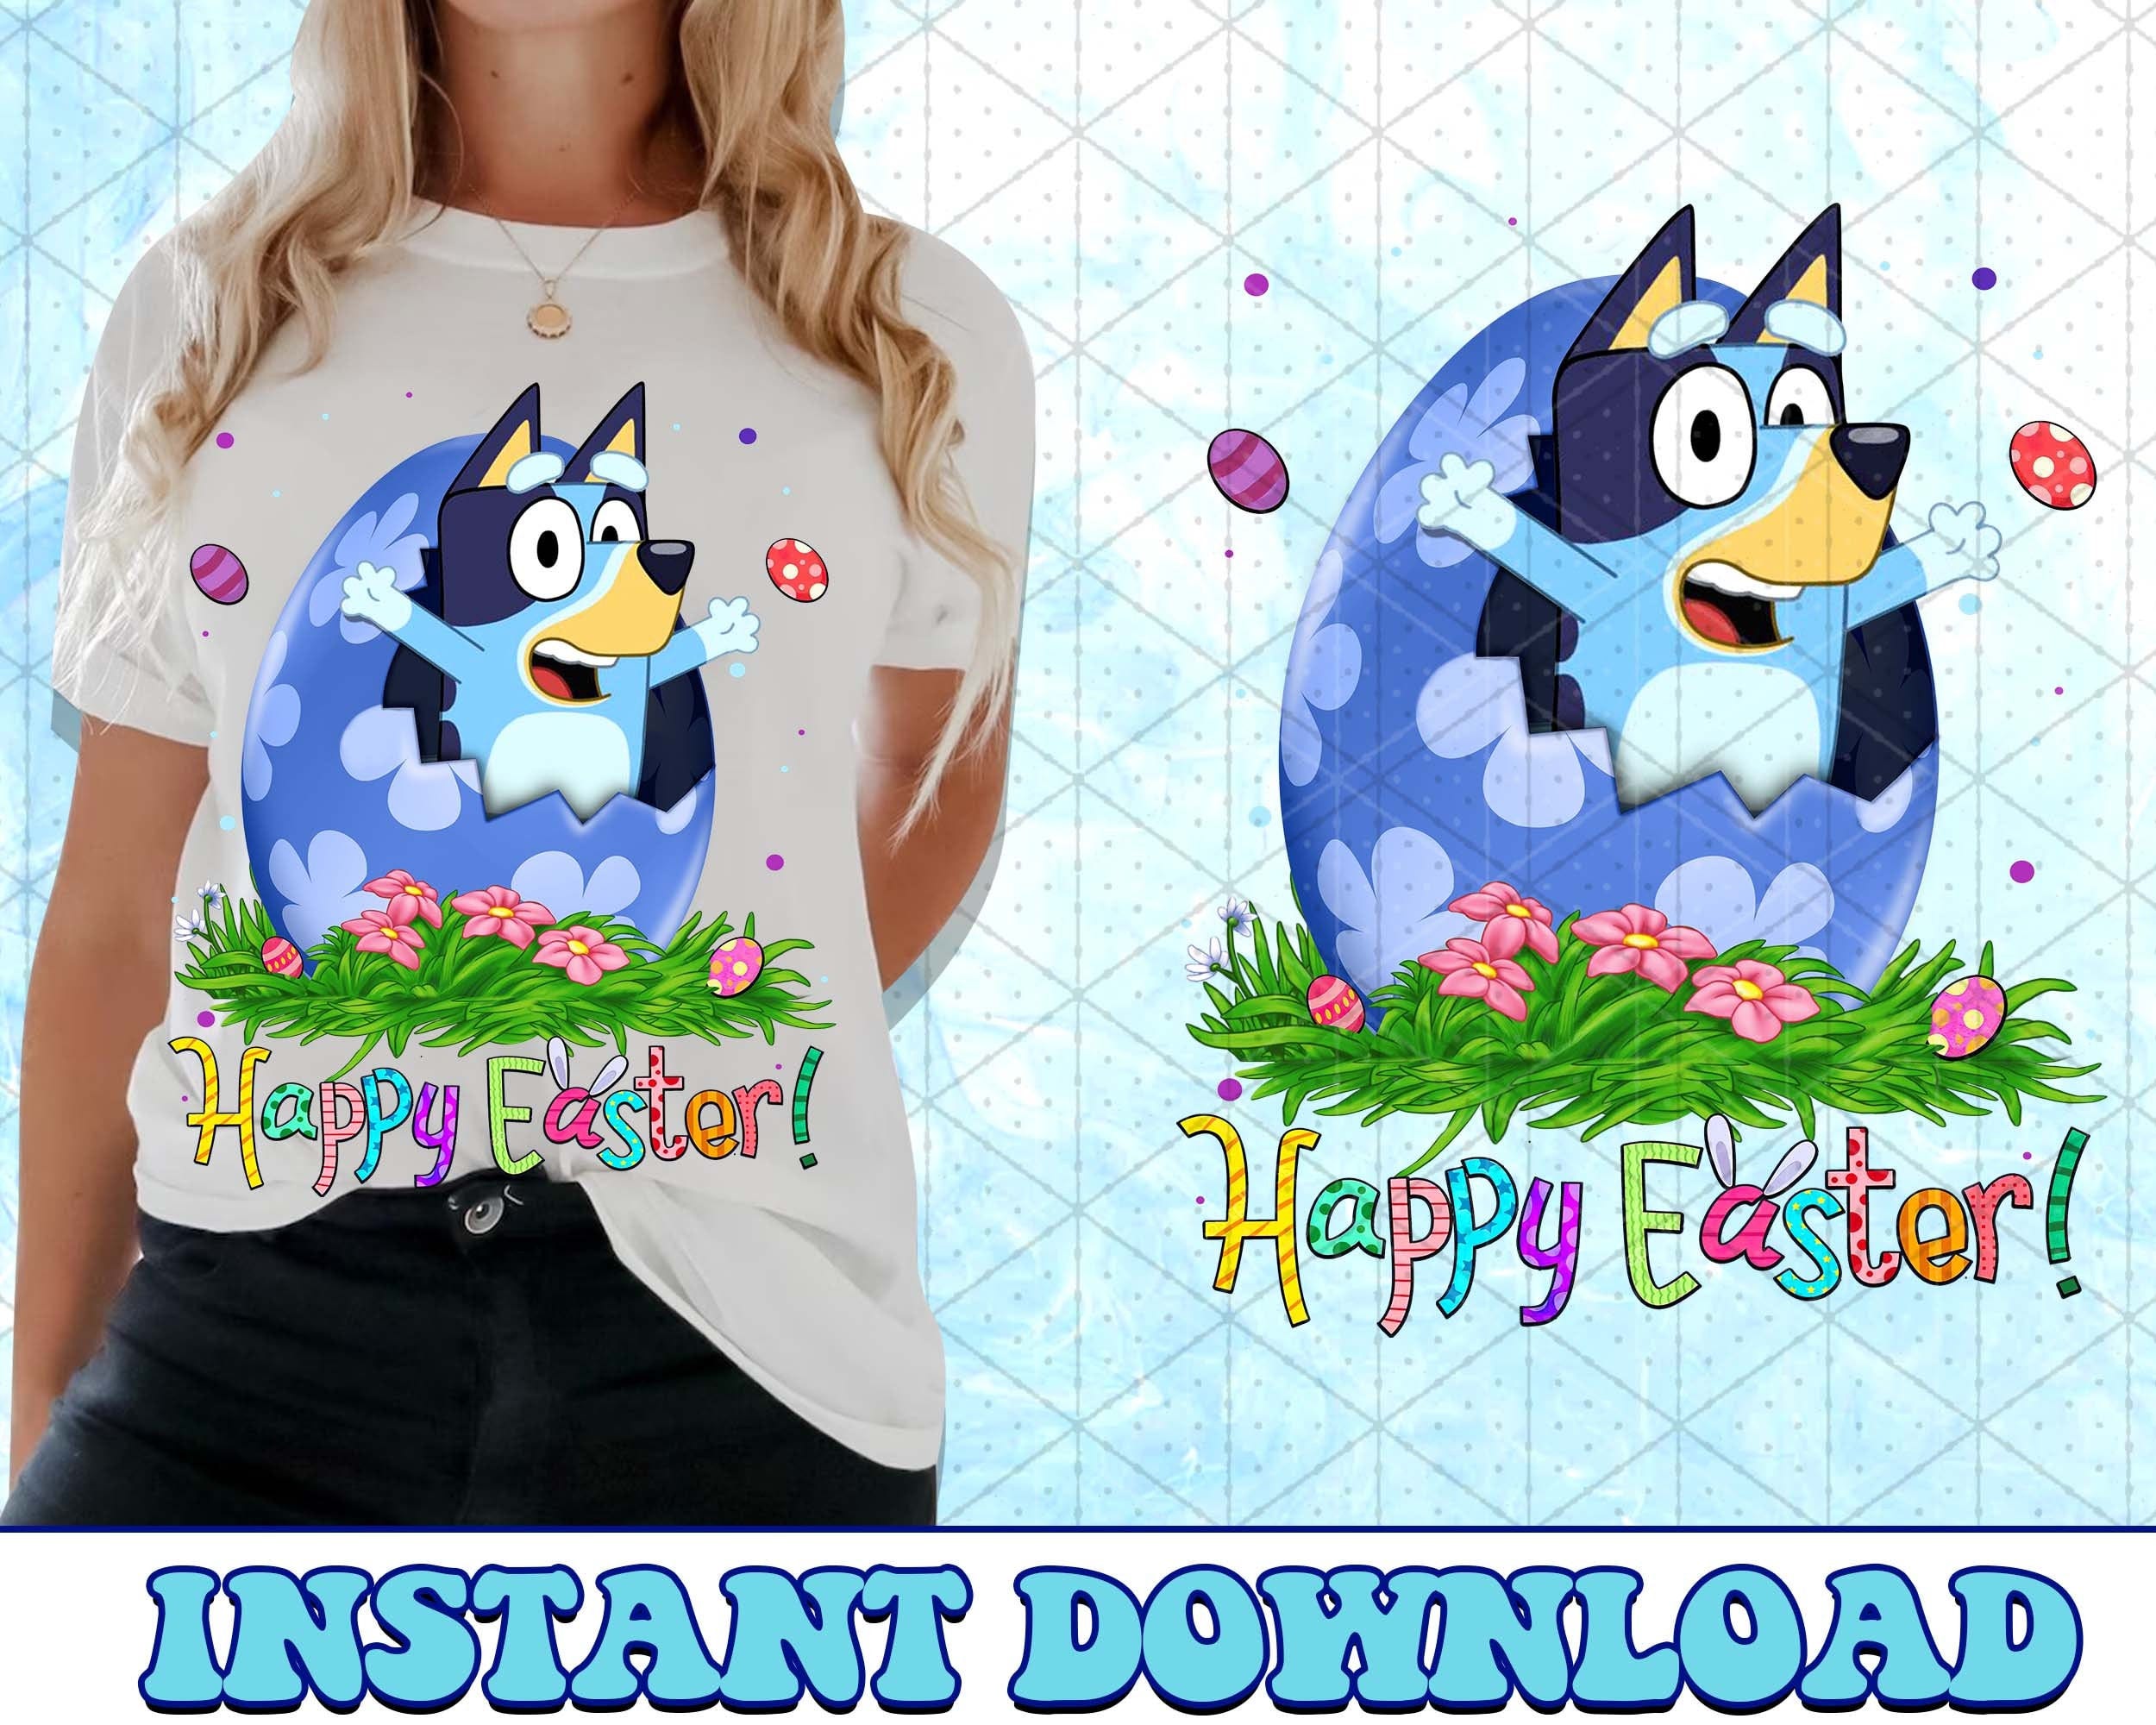 Bluey Easter Day PNG, Bluey Family PNG, Bluey Png, Bluey Bingo Png, Bluey Mom Png, Bluey Dad Png, Bluey Friends Png, Bluey PNG